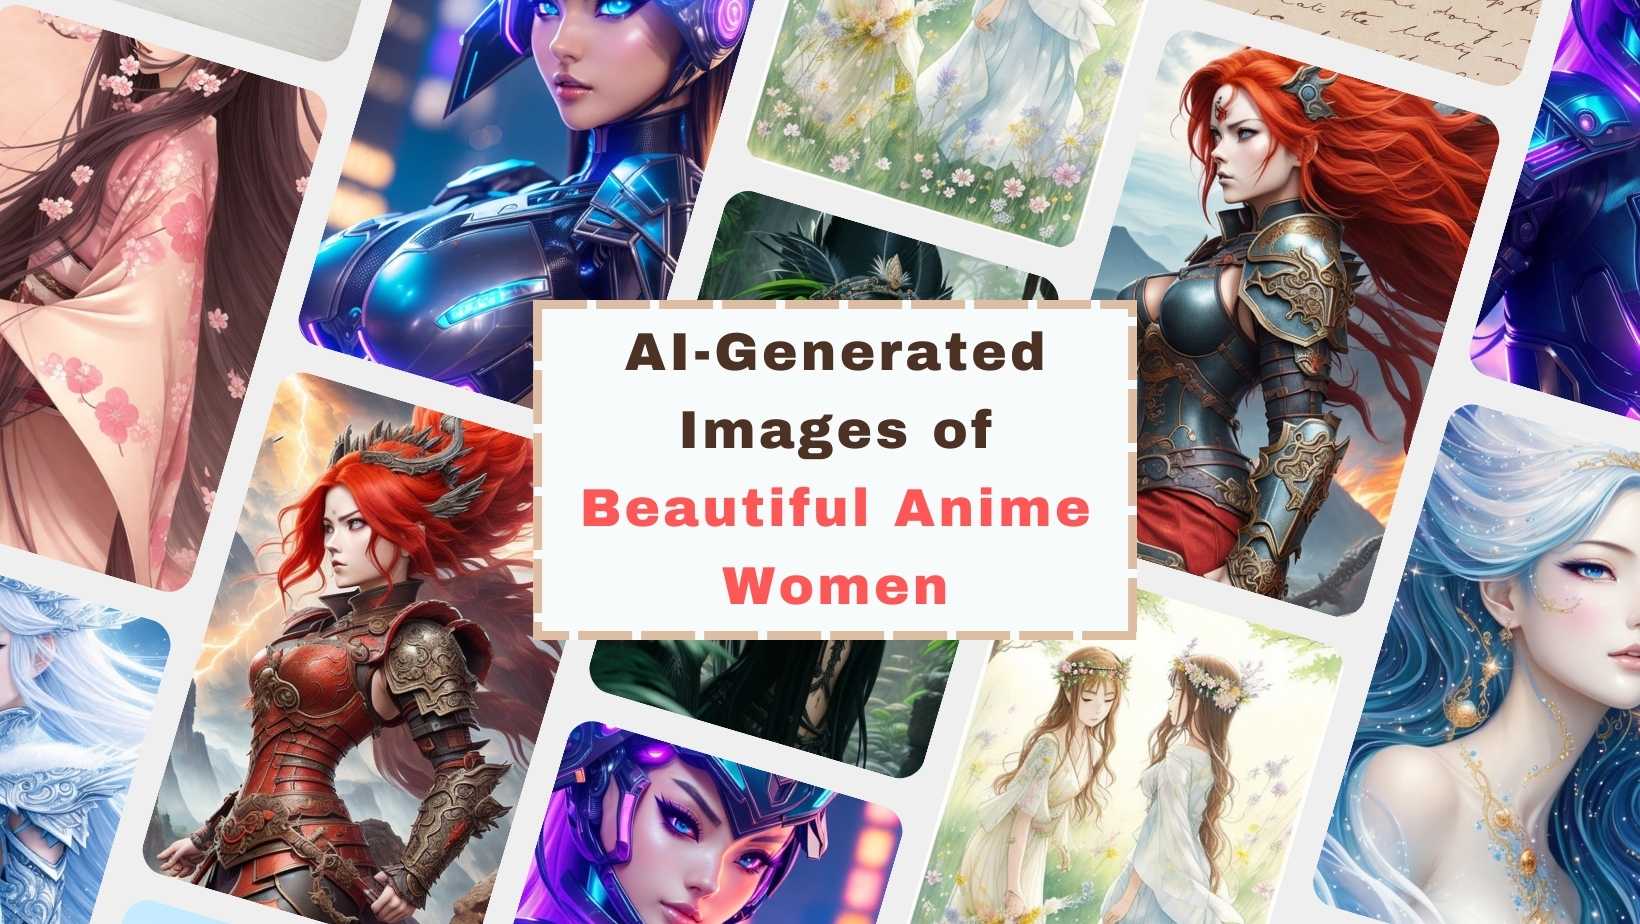 AI-Generated Images of Beautiful Anime Women